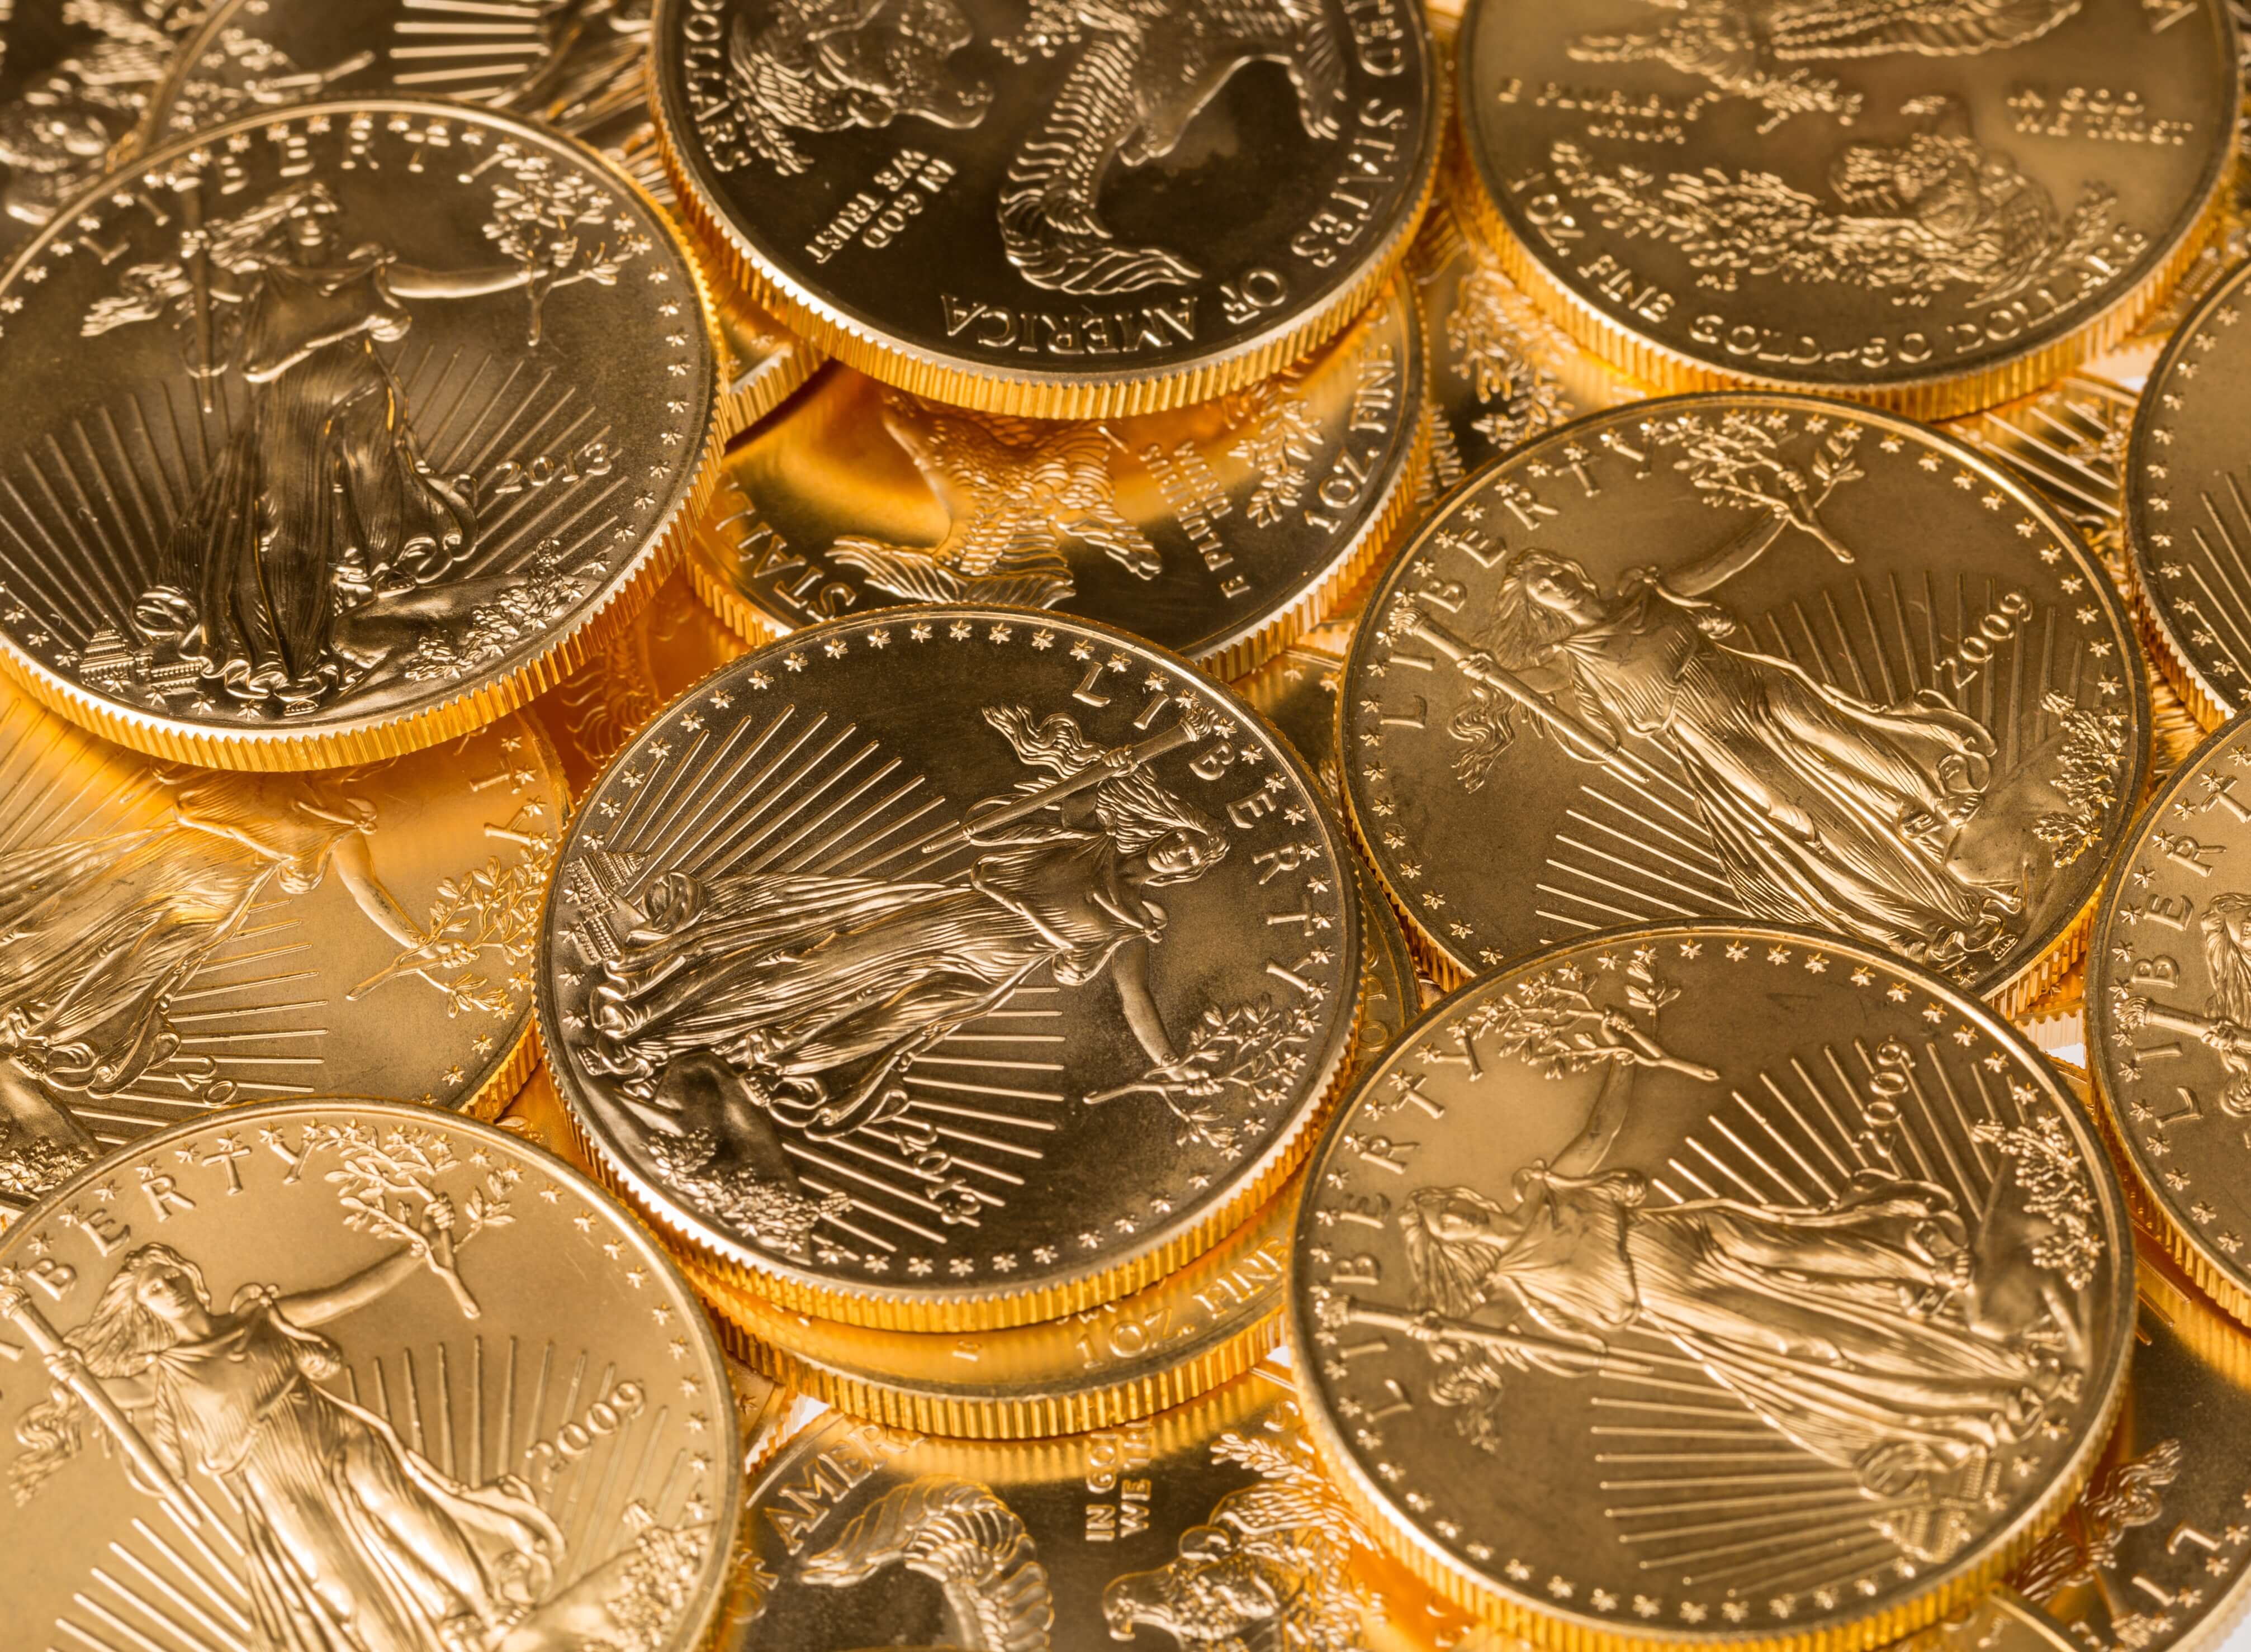 How To Buy Gold Coins: Ultimate Guide to Buying Gold Coins Like a Pro